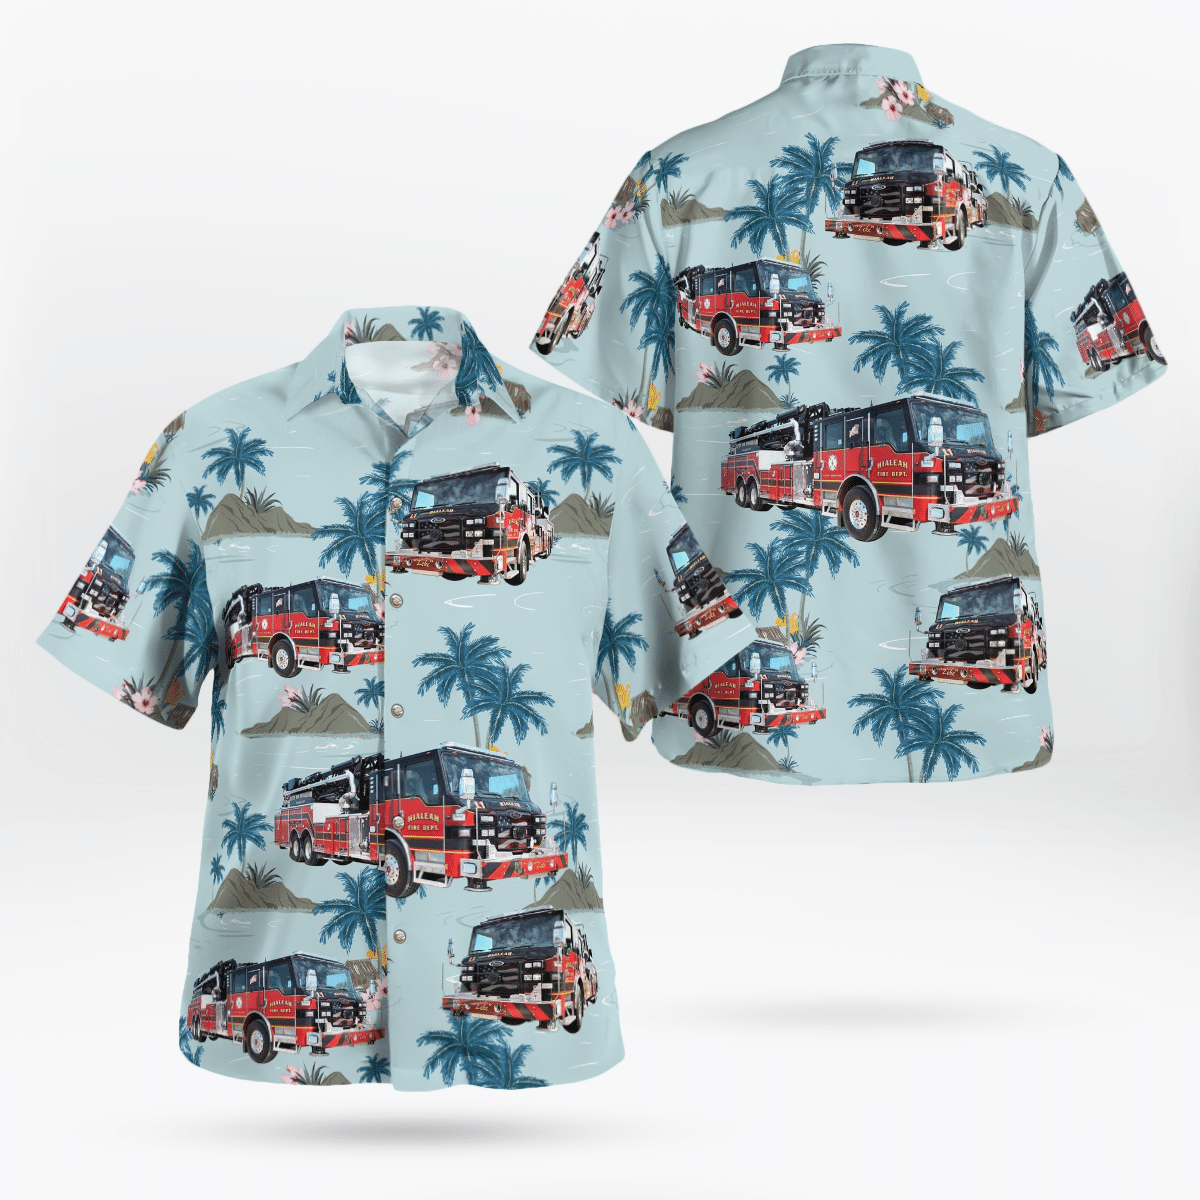 Consider getting these Hawaiian Shirt for your friends 185